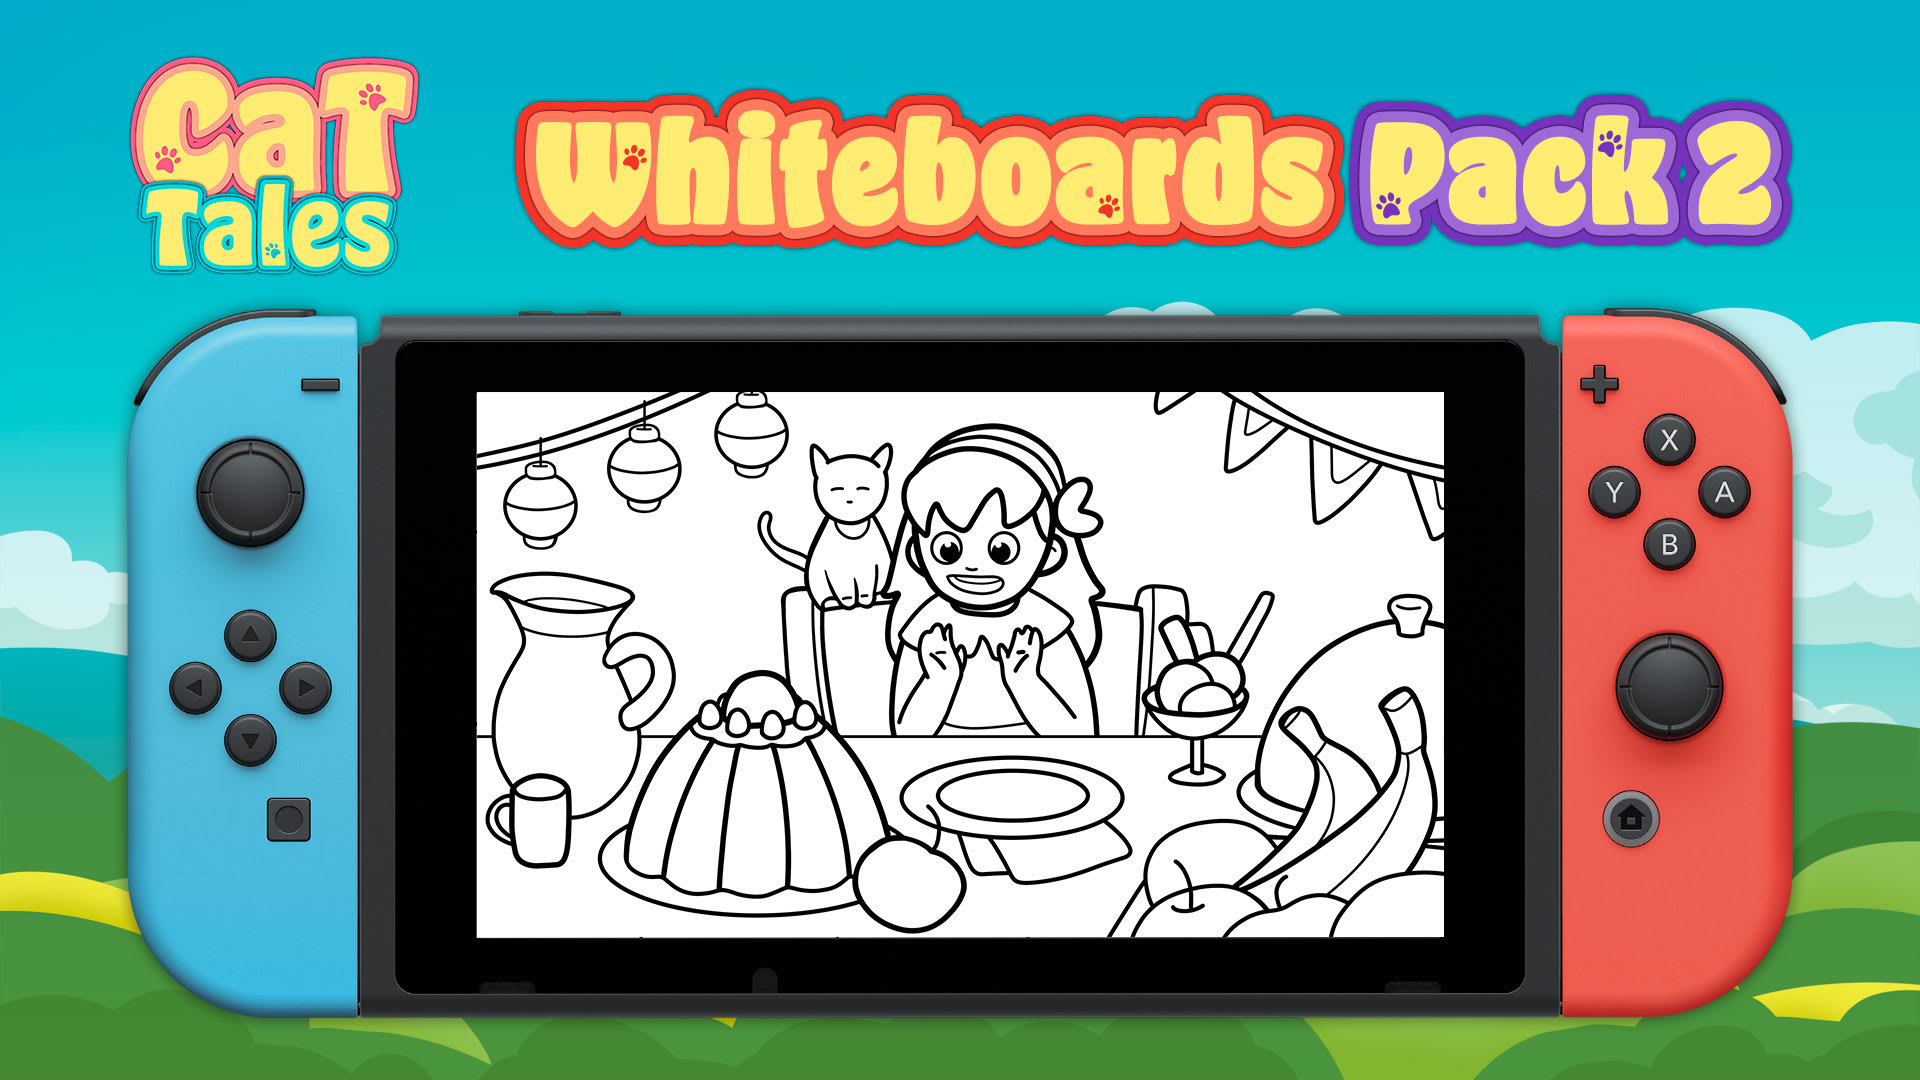 Whiteboards Pack 2